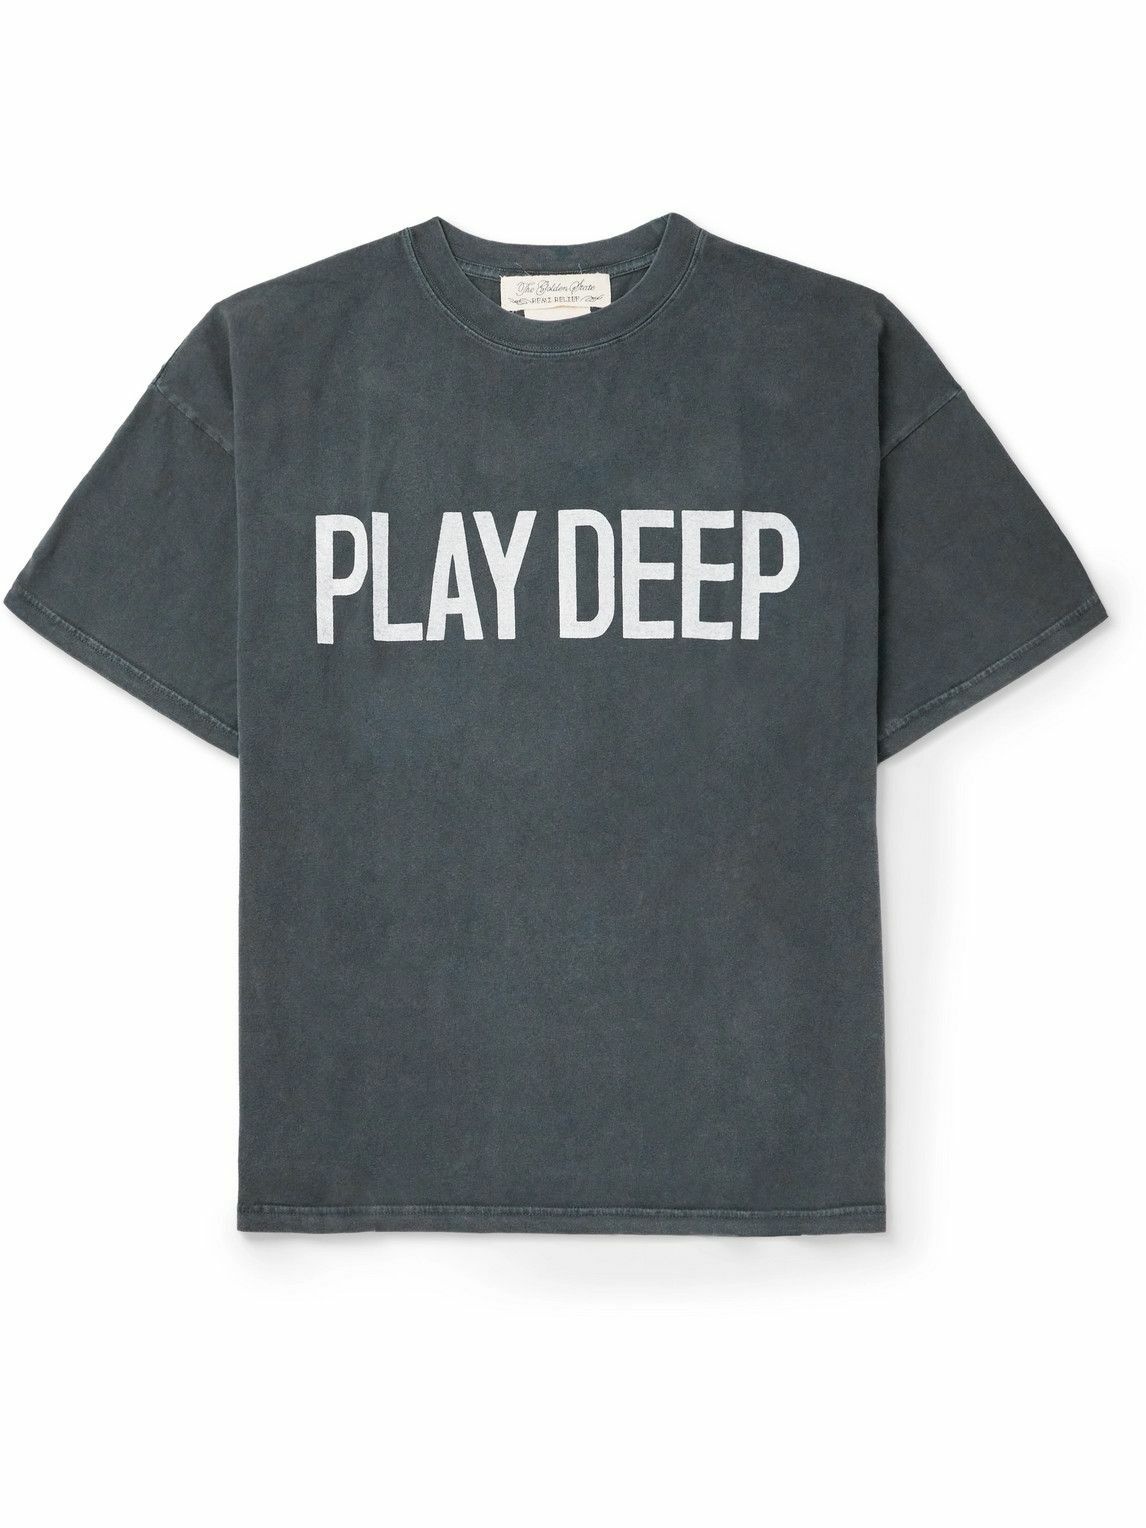 Photo: Remi Relief - Play Deep Cotton-Jersey T-Shirt - Gray